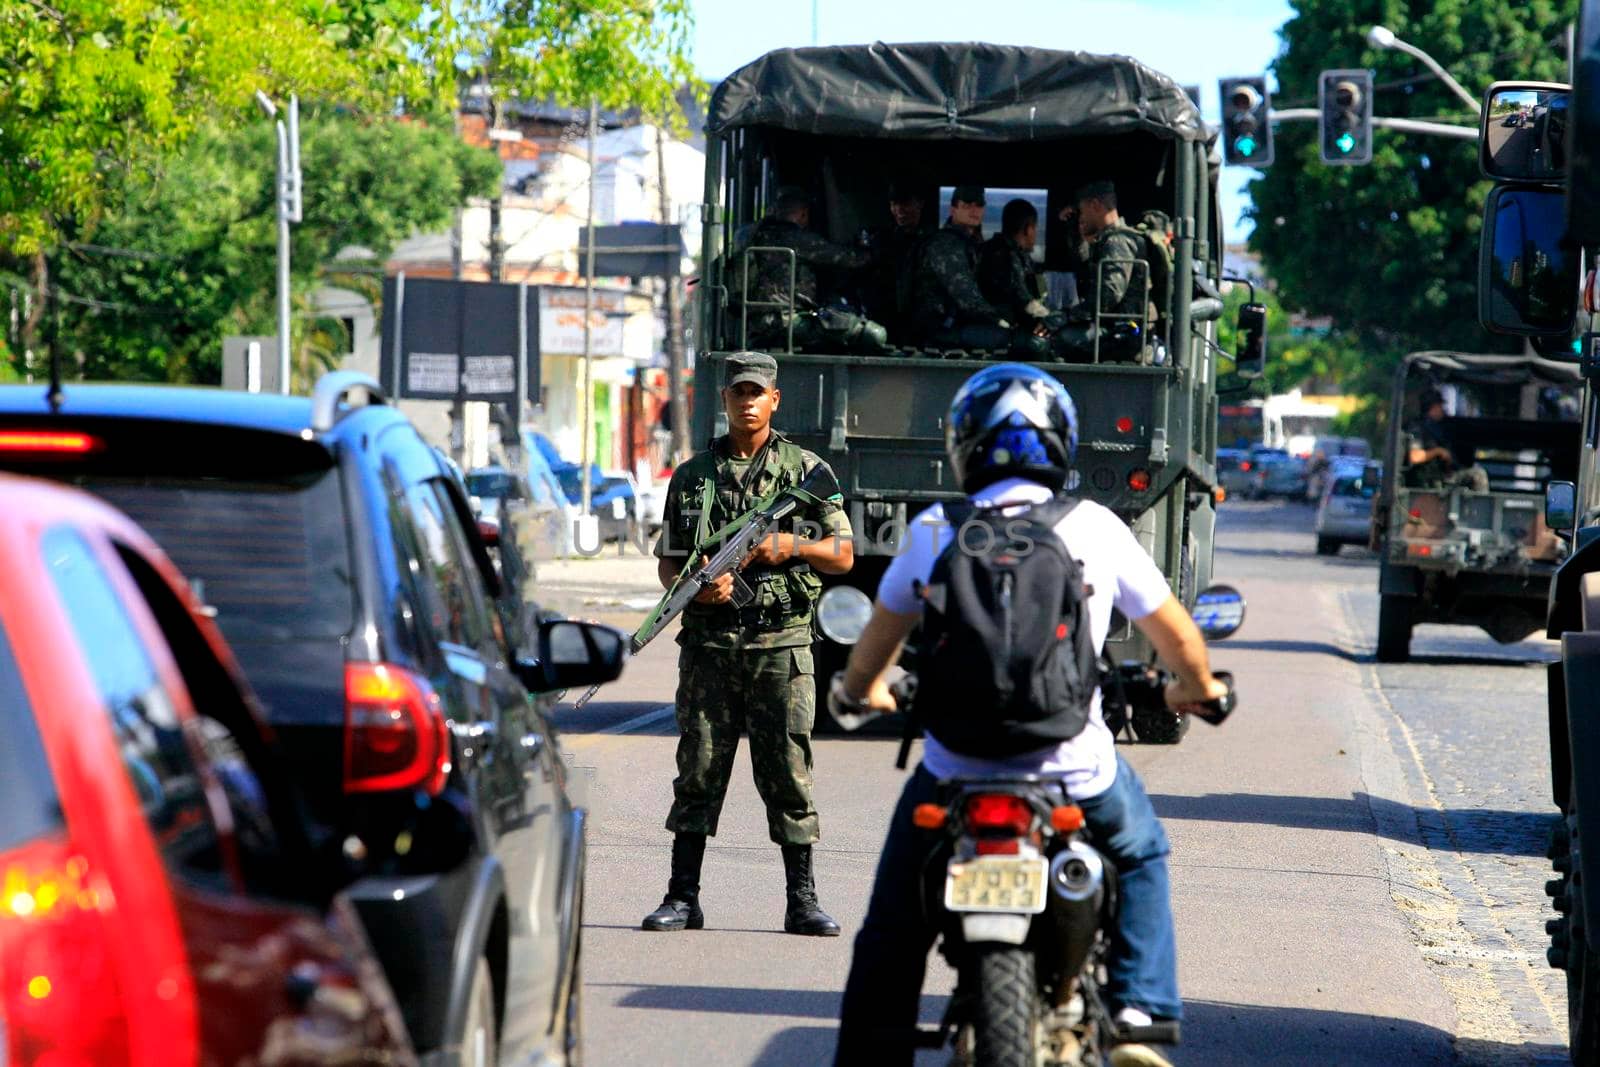 buerarema, bahia, brazil - february 14, 2014: Brazilian army soldiers patrol the streets of the city of Buerarema, during agrarian conflicts with Tupinamba Indians.